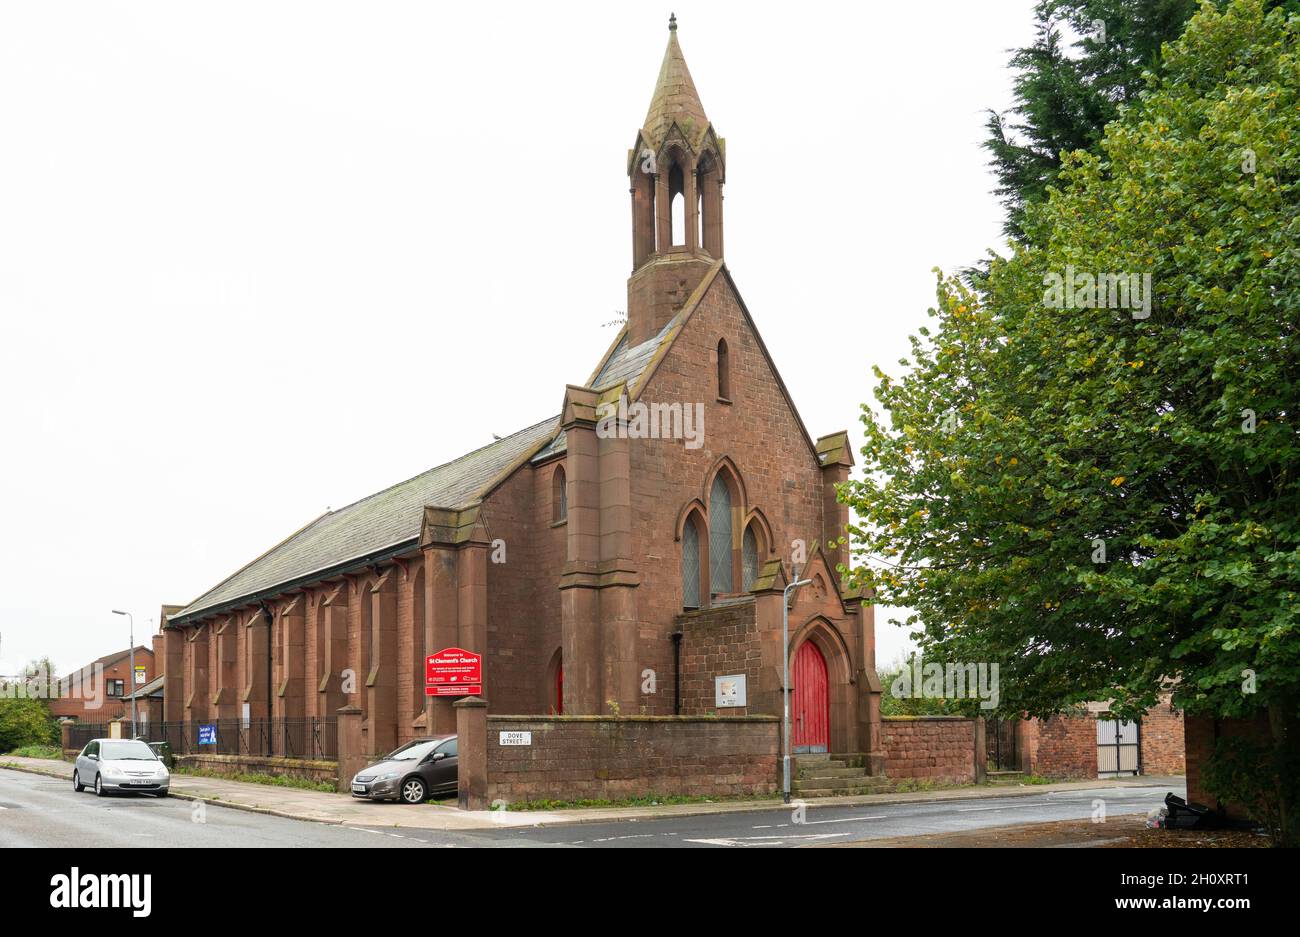 St Clement's Church at the junction of Dove St and Beaumont Street, Toxteth, Liverpool 8. Taken in September 2021. Stock Photo